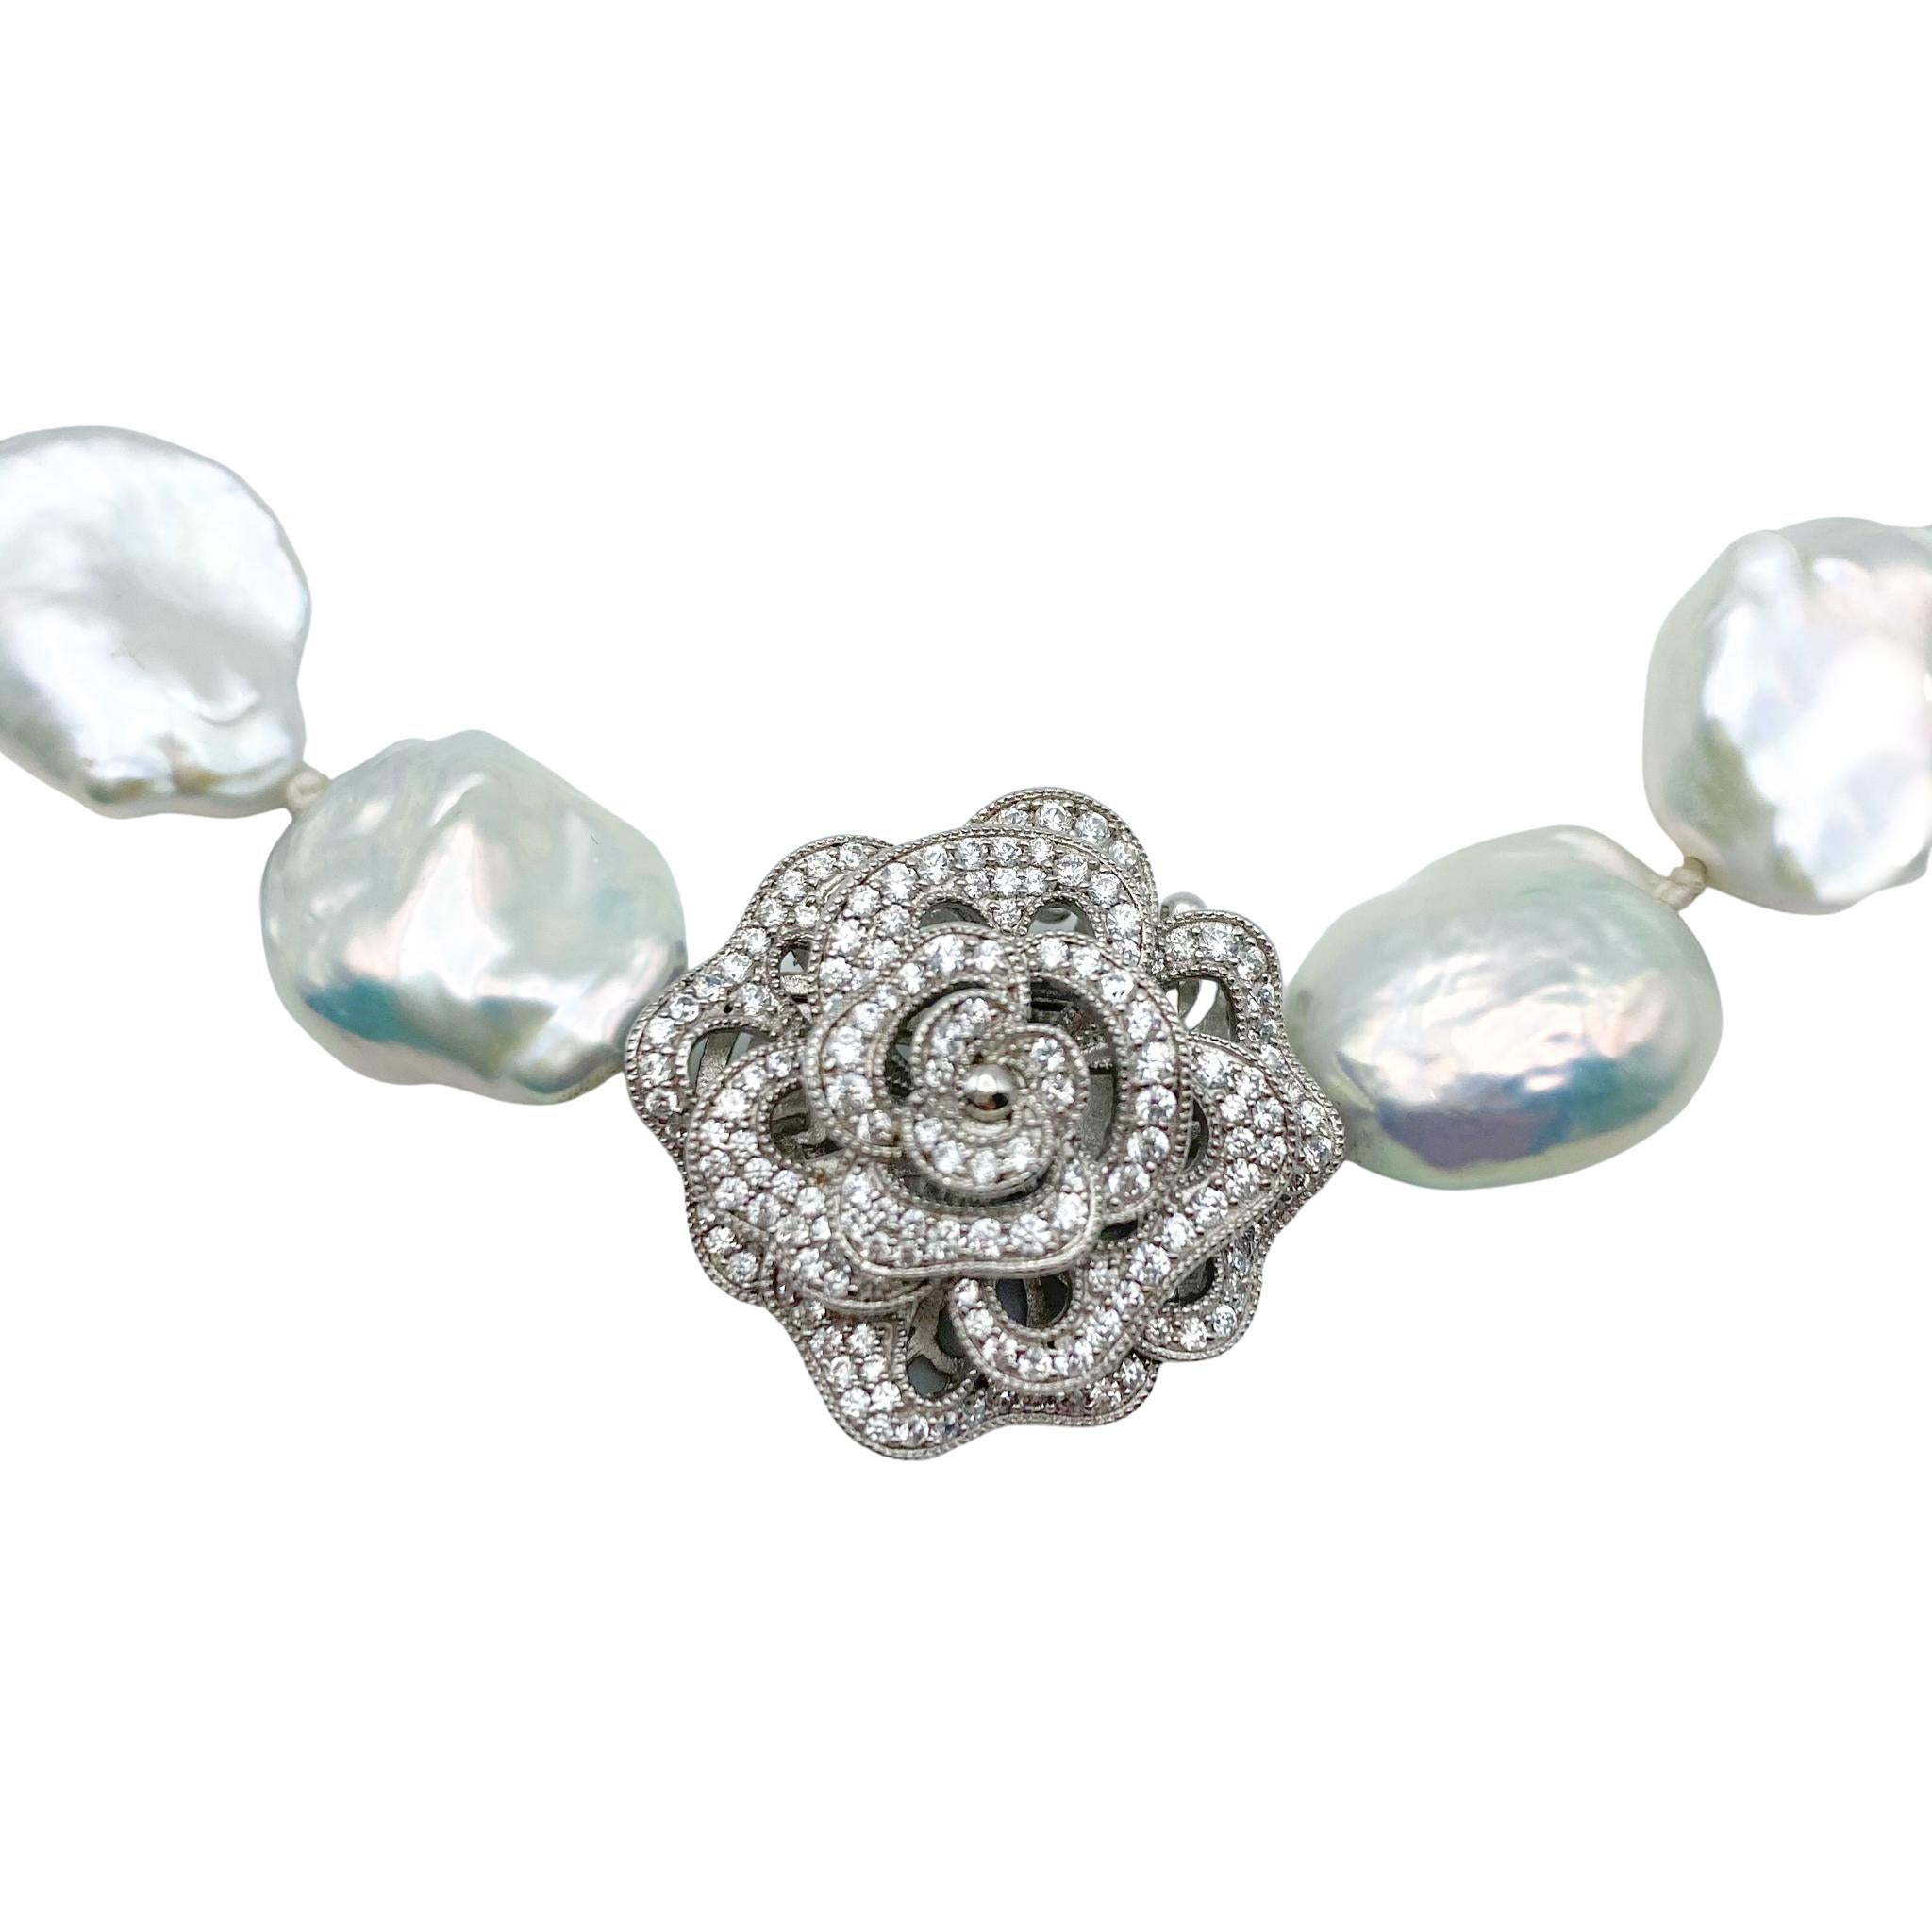 Very Rare Non-Nucleus Pearls Necklace with Sapphire Clasp 1.60 Carat In Good Condition For Sale In Carlsbad, CA